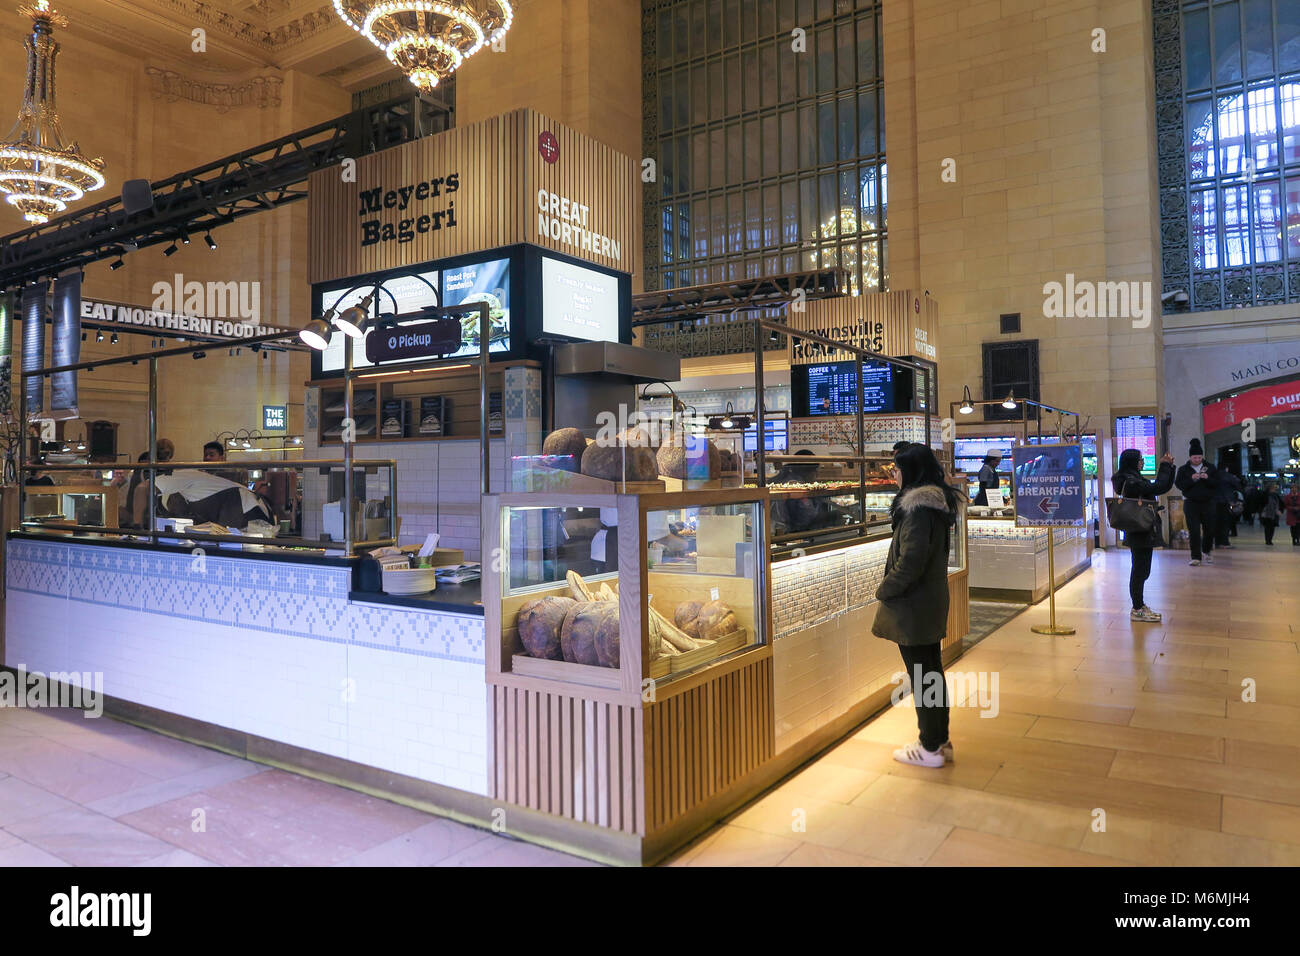 Great Northern Food Hall, Vanderbilt Hall in Grand Central Terminal, NYC, USA Stock Photo